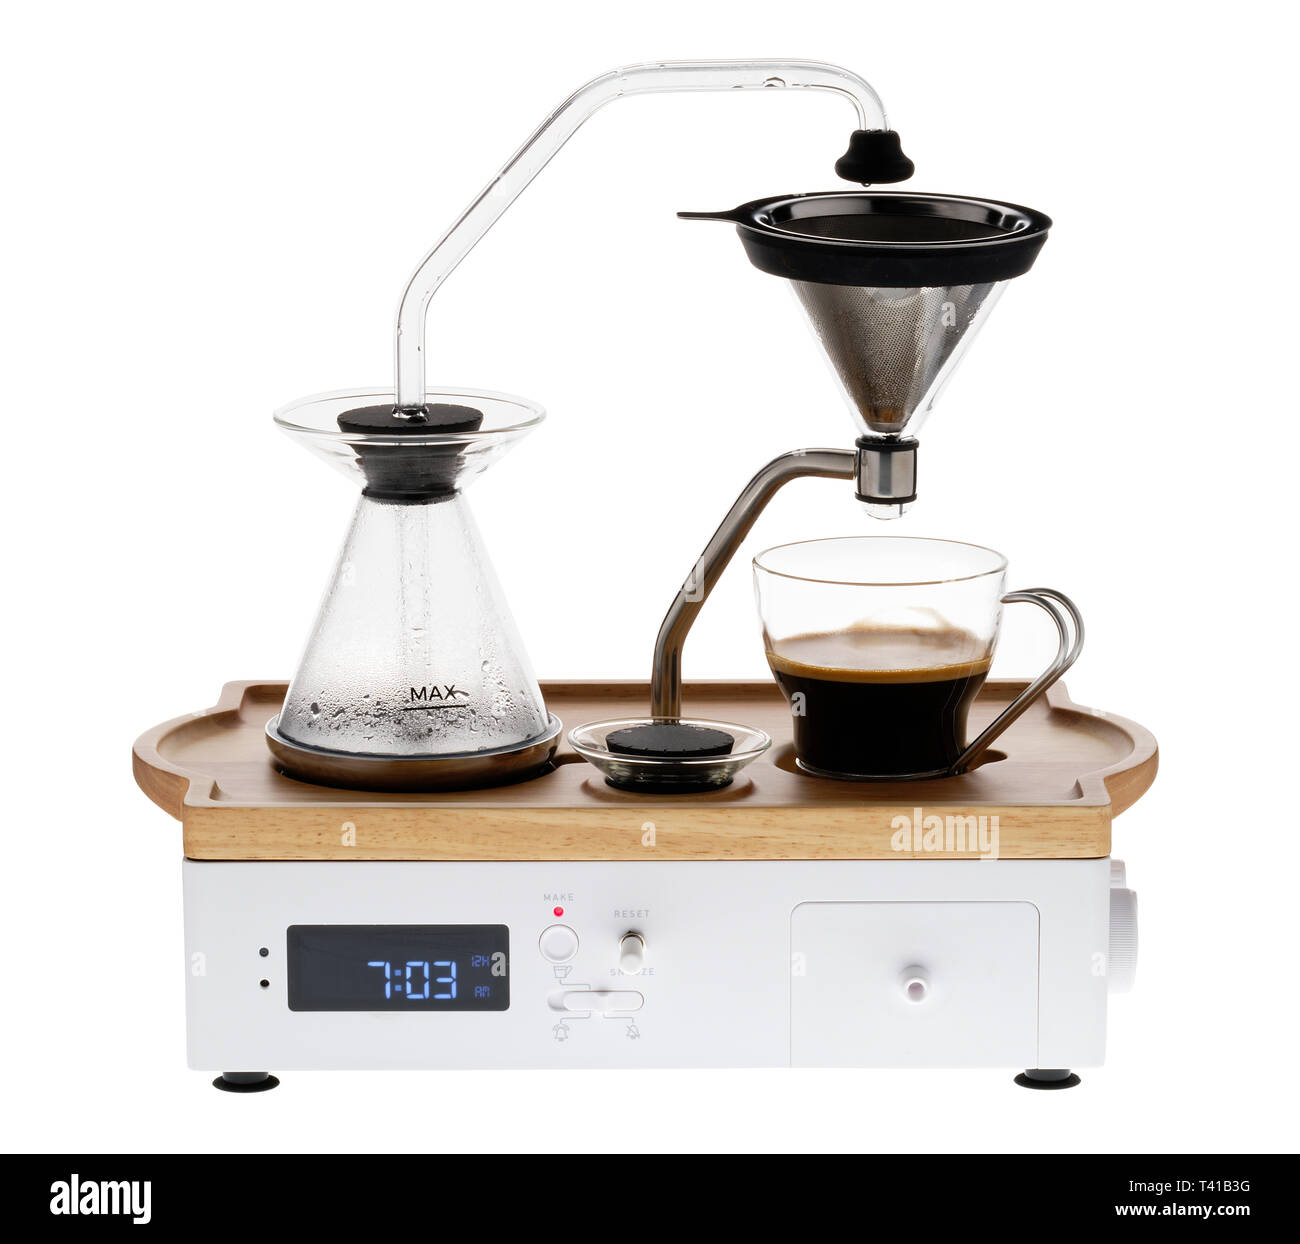 Barisieur Coffee Alarm Clock. Makes fresh coffee at a preset time and provides milk in mini cooler. Bedside or kitchen appliance. Stock Photo